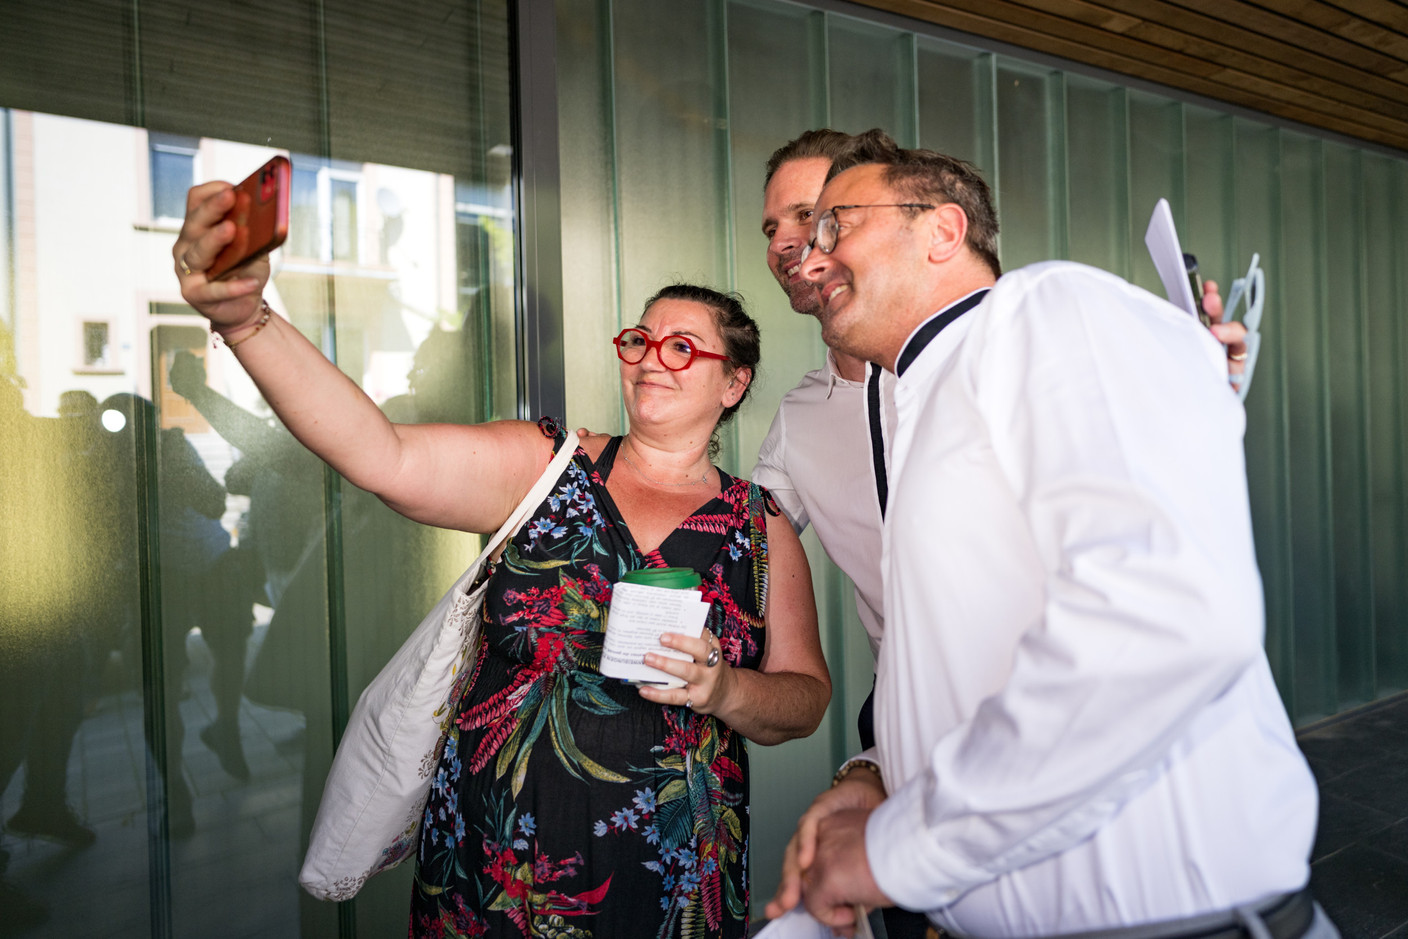 A Luxembourg City voter takes a selfie with Xavier Bettel, Luxembourg’s prime minister, and his husband, outside a polling station during municipal elections, 11 June 2023. Photo: Nader Ghavami